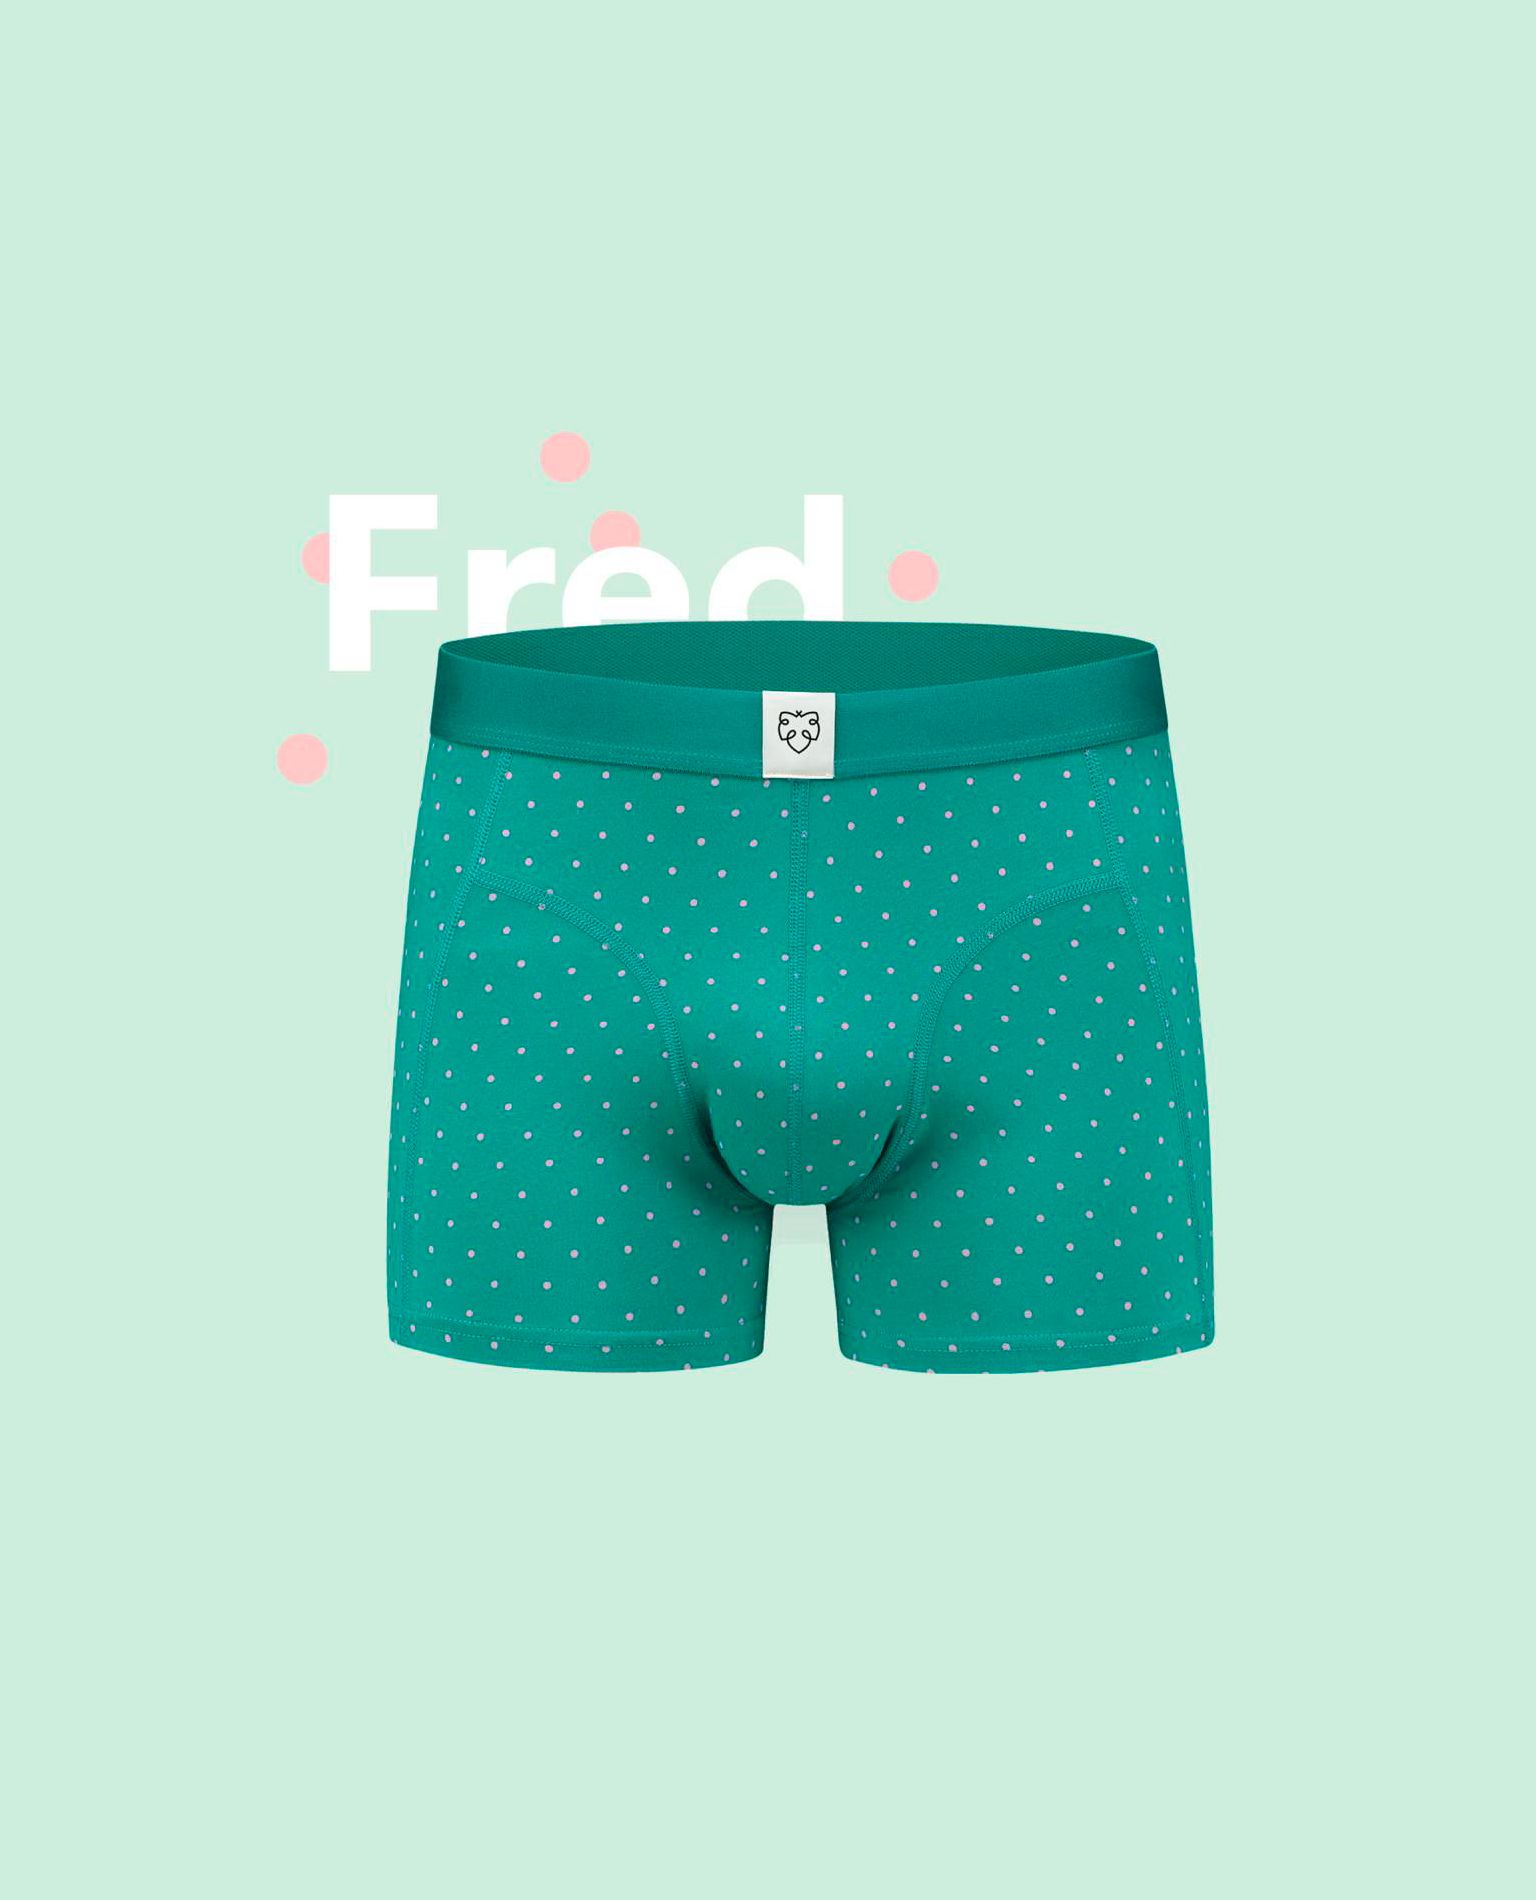 https://jerone.com/images/product/9991_Fred-Underwear-A-Dam_4002-detail.jpg